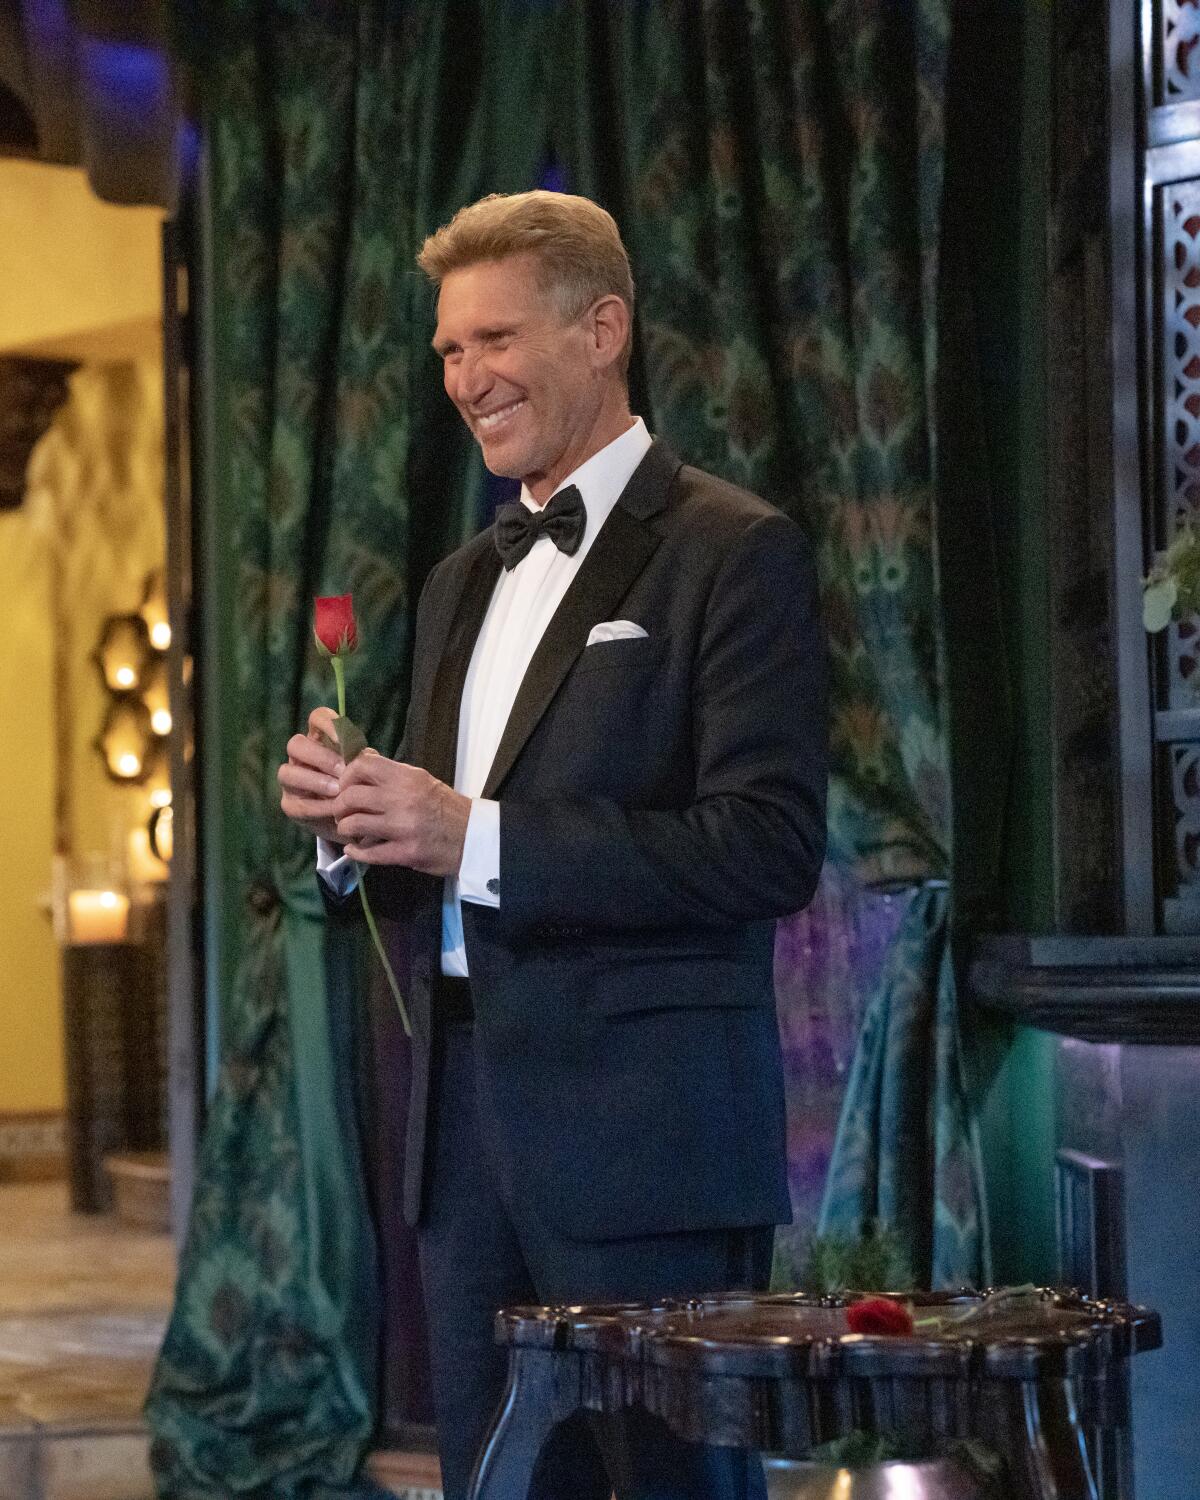 A smiling man in a tuxedo holds a red rose.